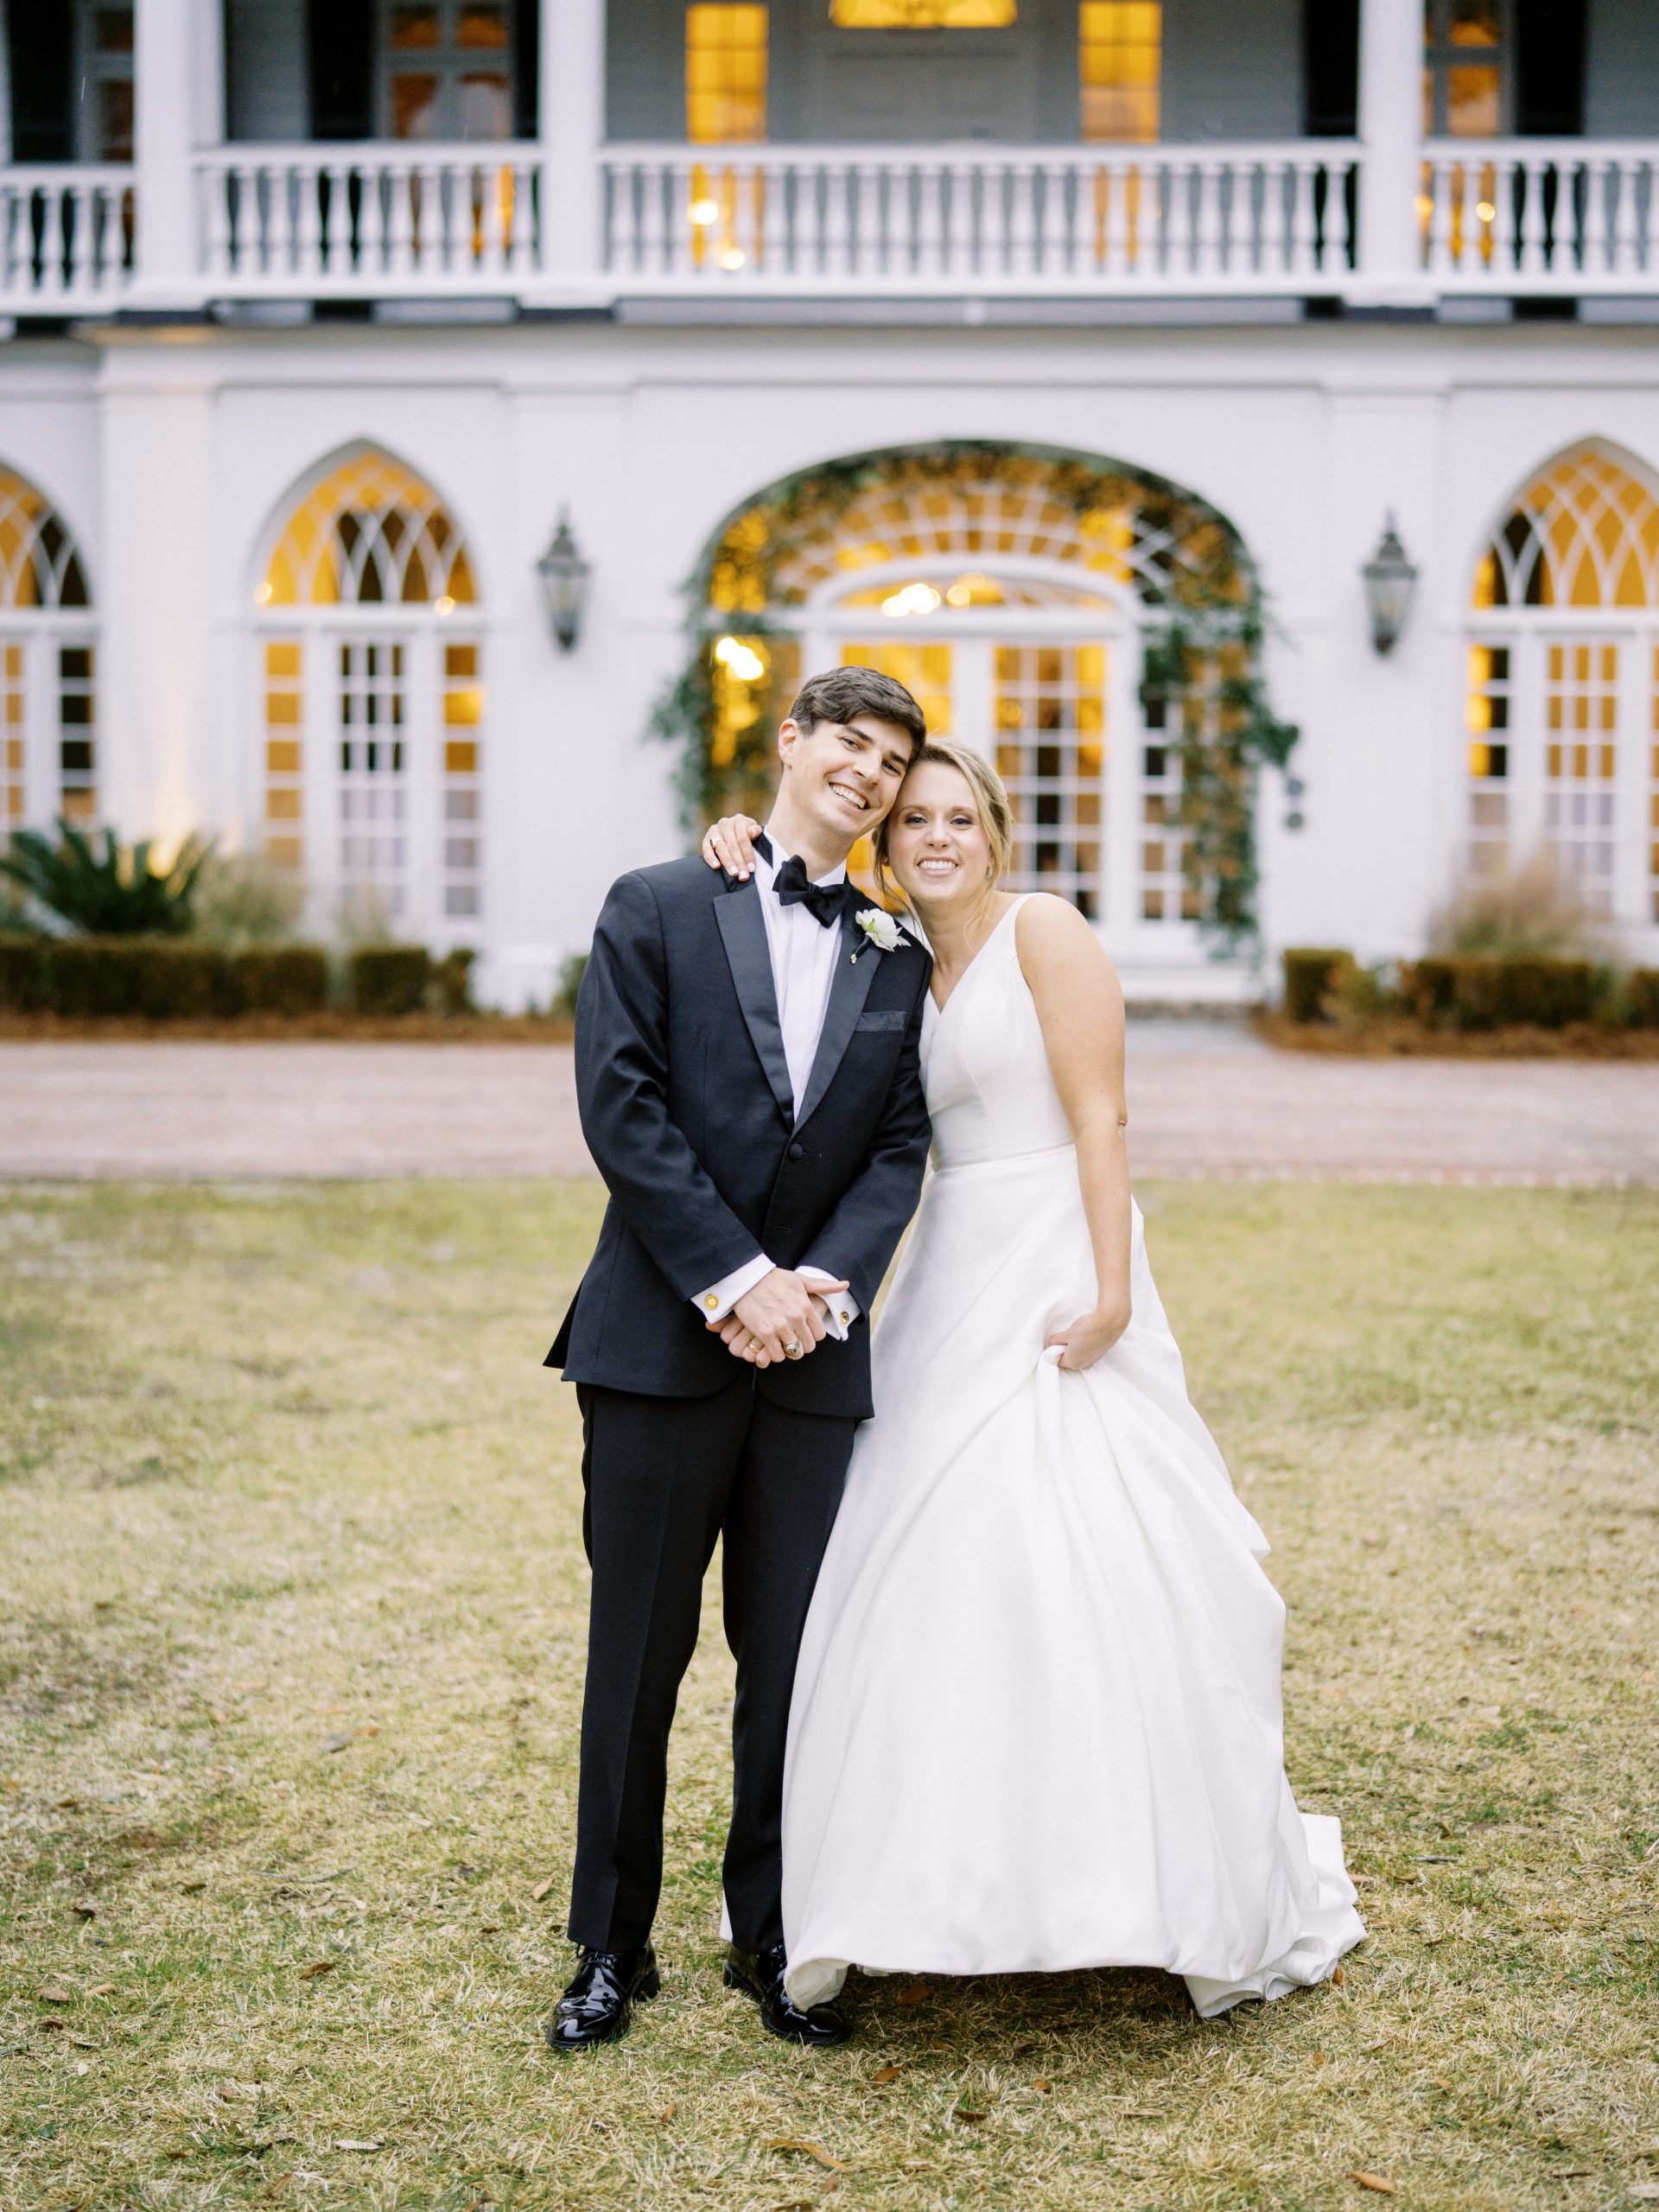 Sarah Hance and William Short were married Feb. 6 at Lowndes Grove in Charleston. They enjoy cooking and entertaining, and William is a wine enthusiast — an added bonus. Their sassy corgi, Lyla, never misses a party.
